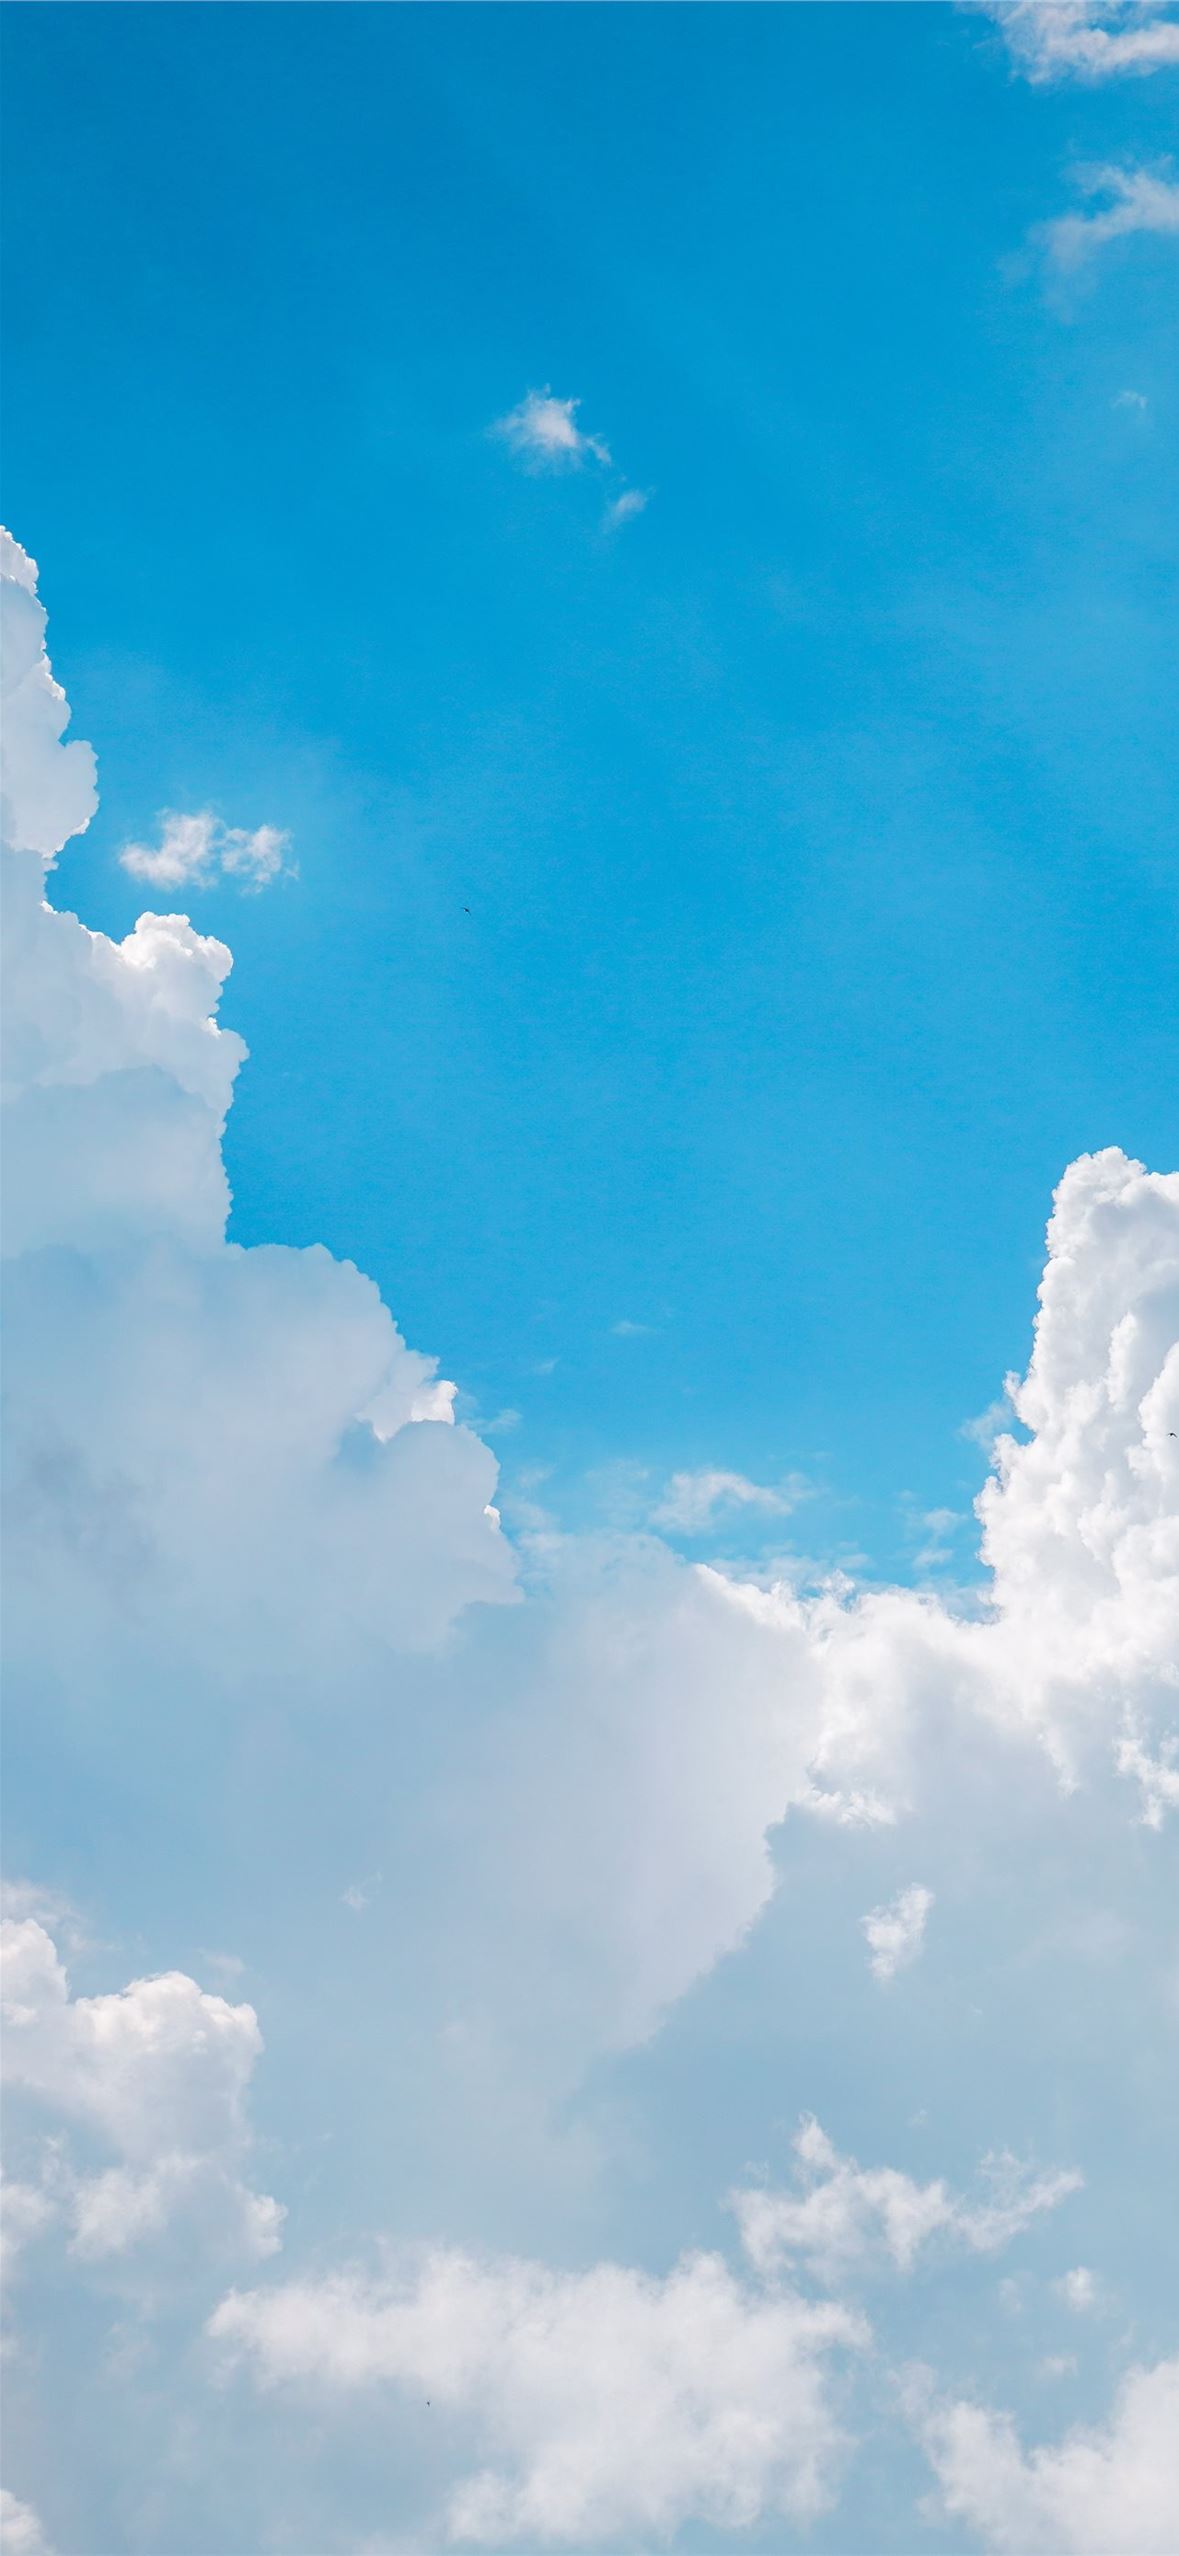 white clouds and blue sky during daytime iPhone Wallpapers Free Download